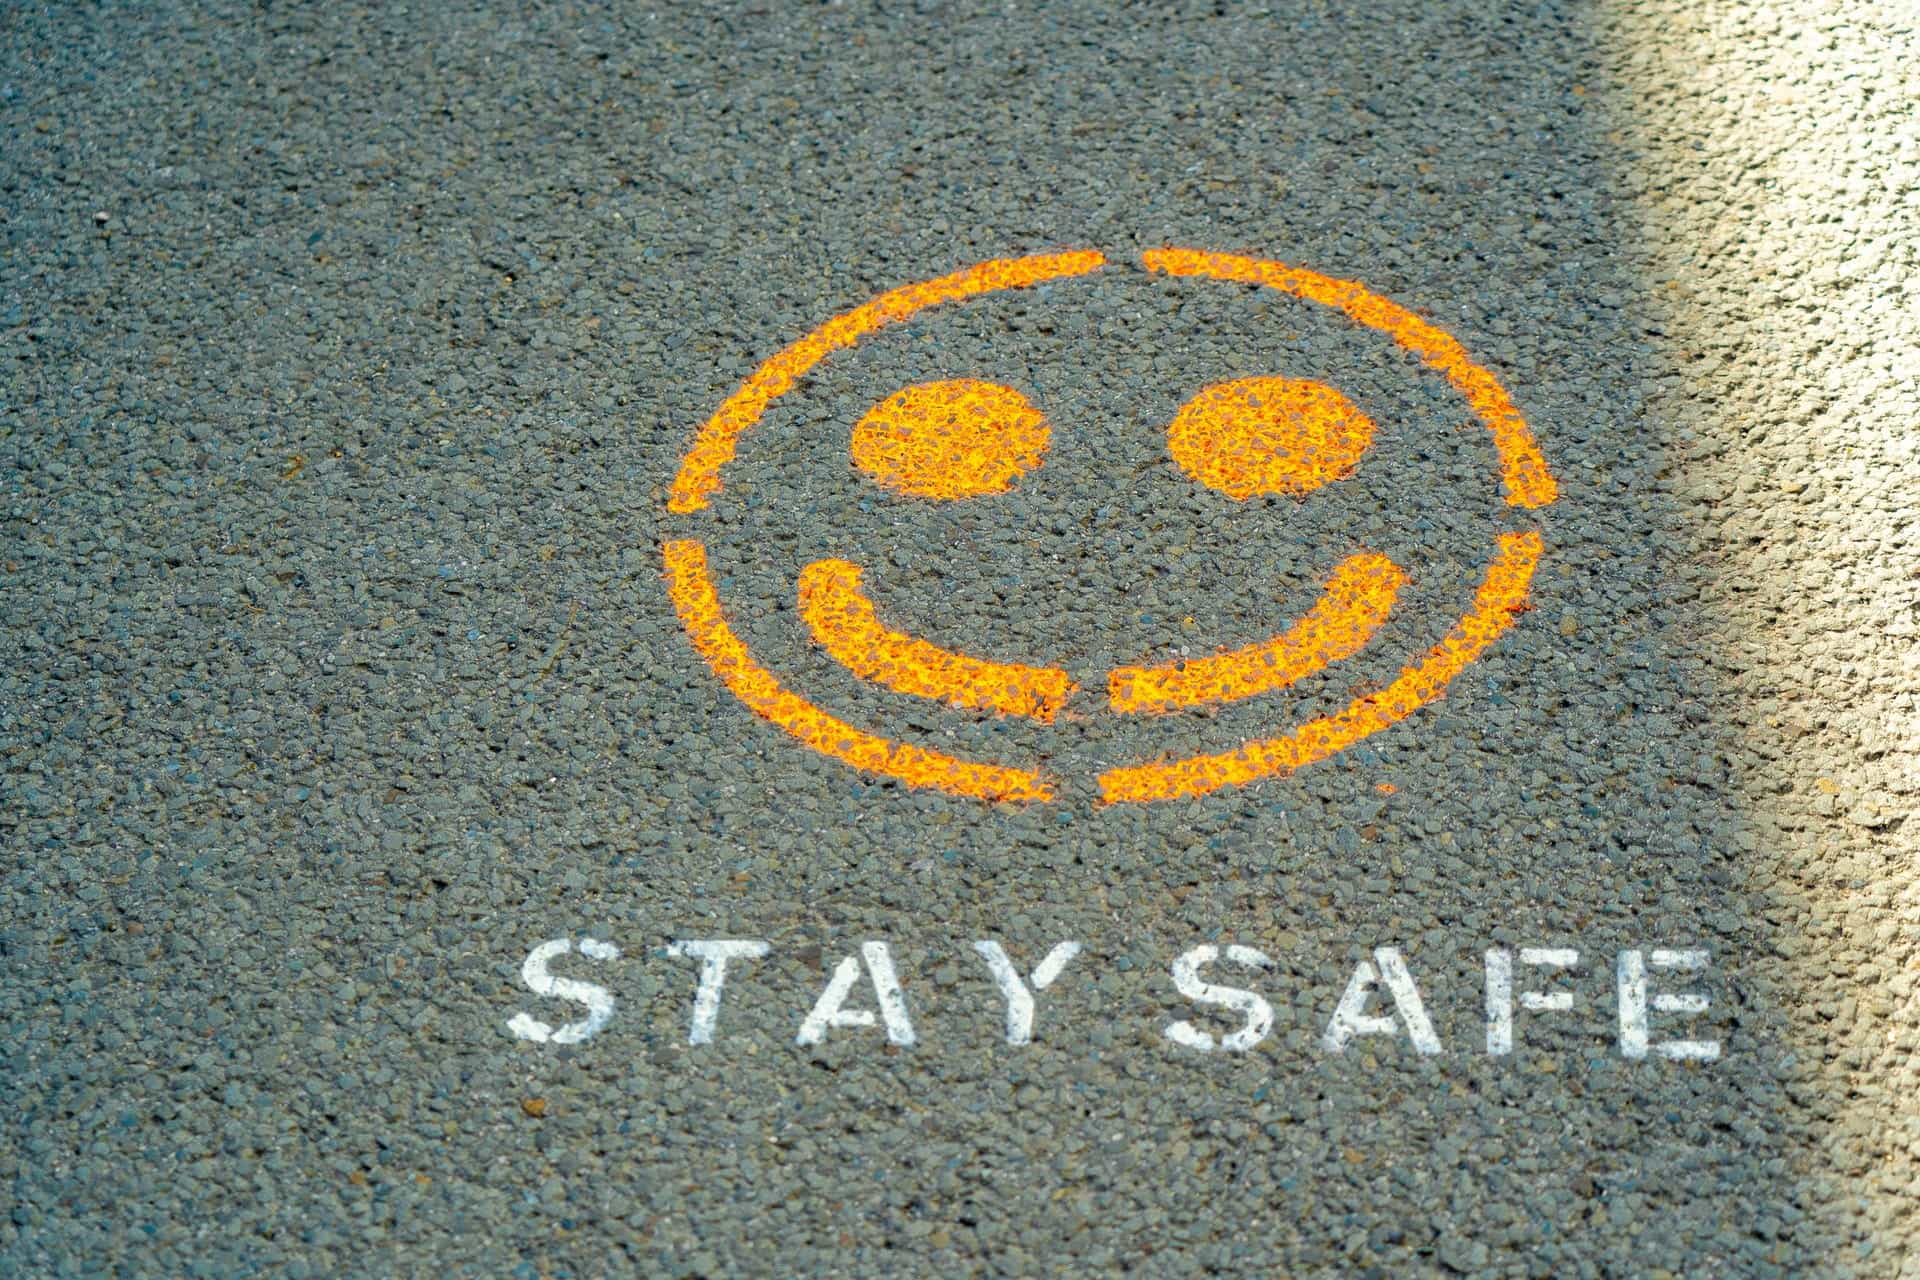 Orange graffiti on pavement shows a smiling face and the text, STAY SAFE, underneath.